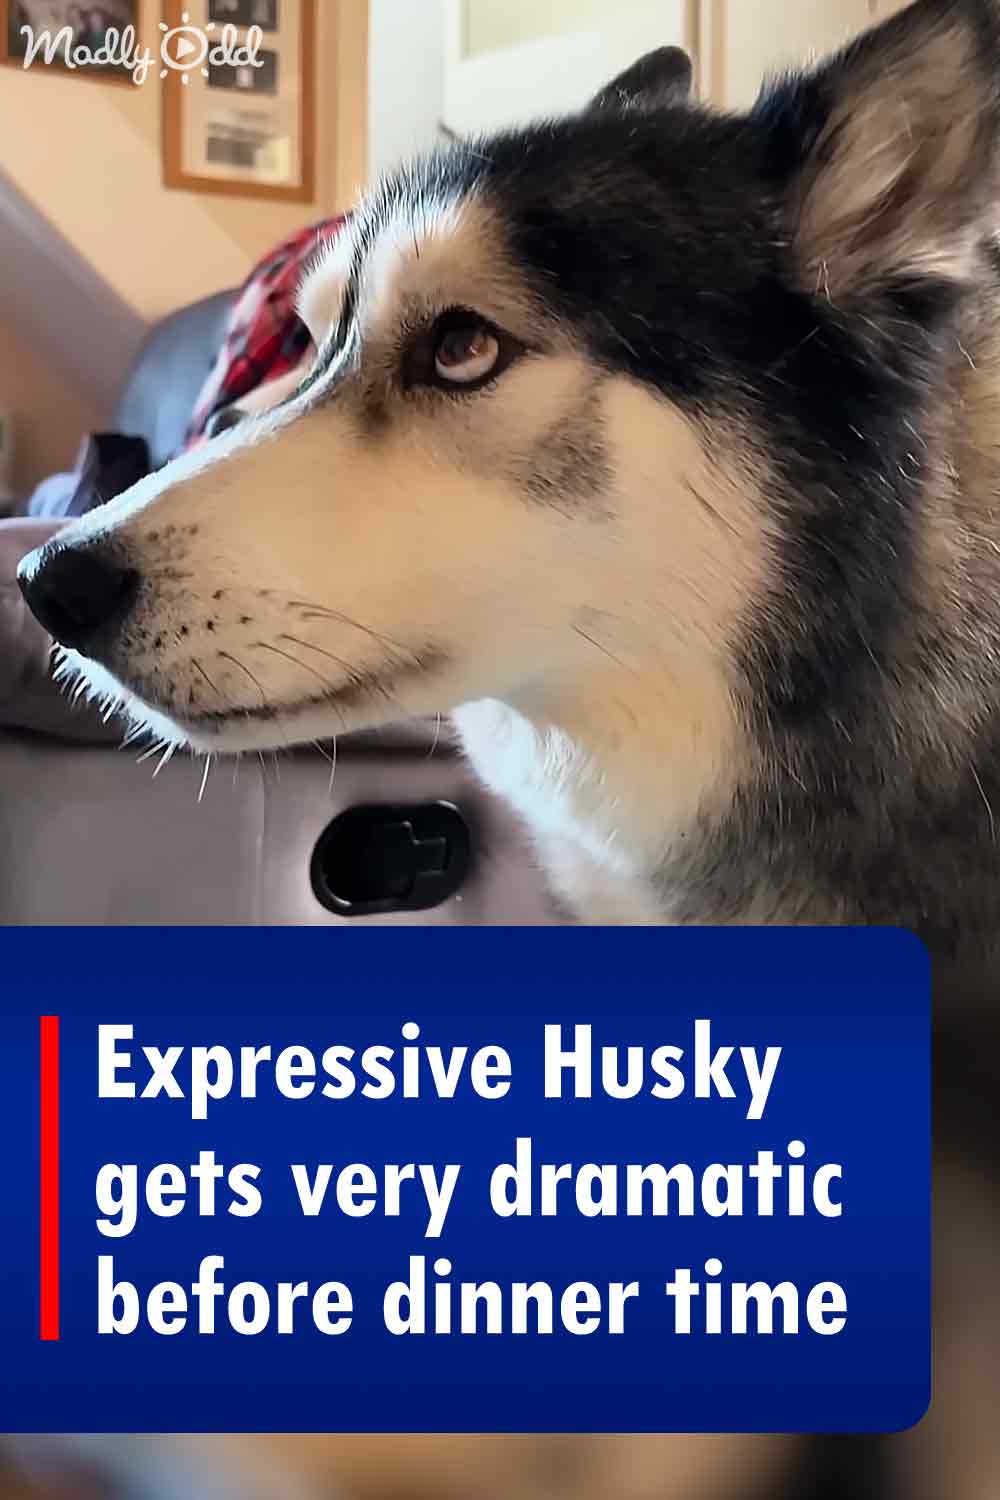 Expressive Husky gets very dramatic before dinner time